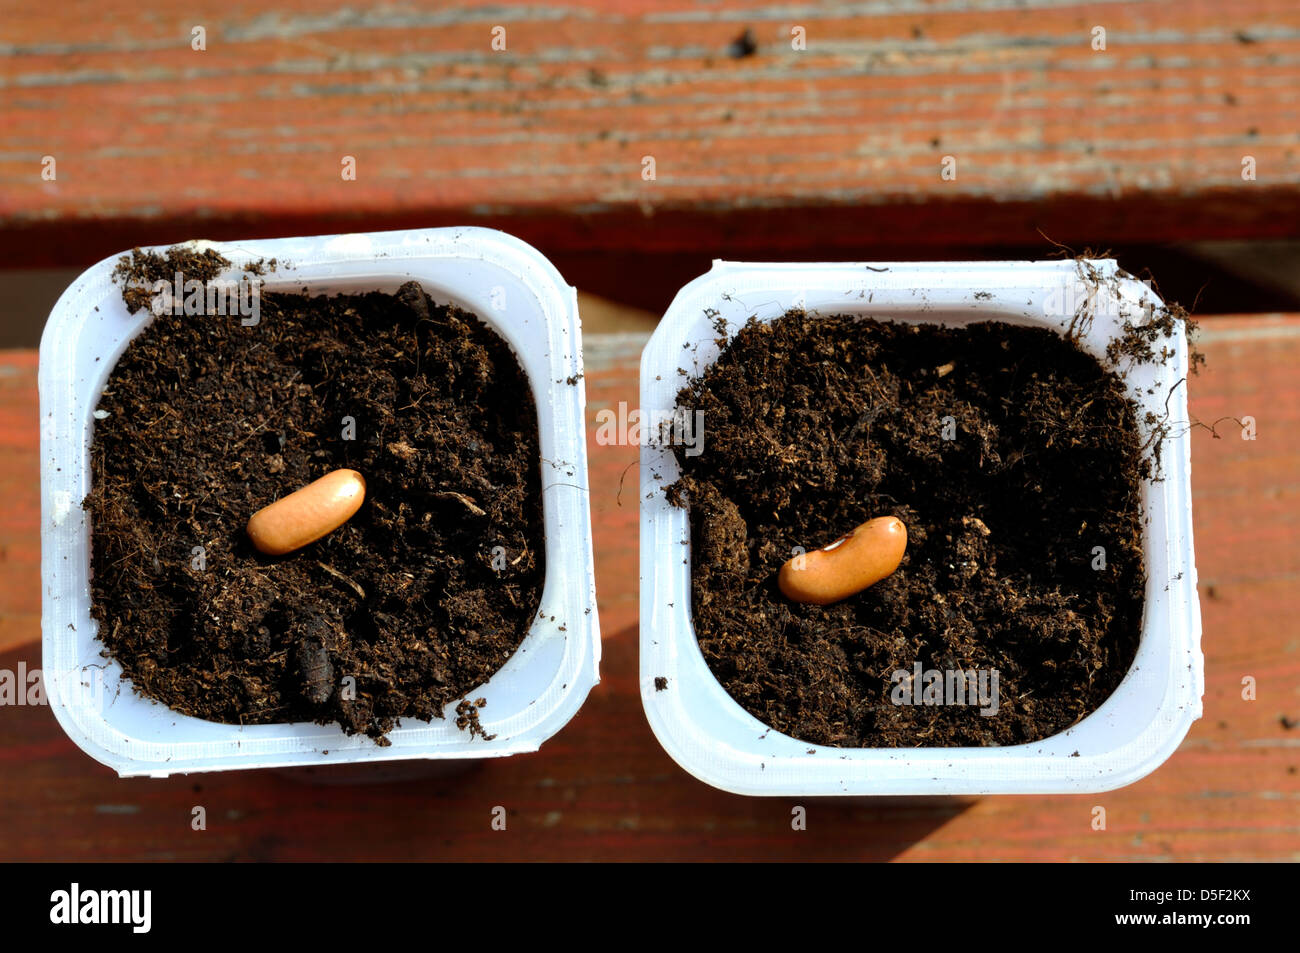 Organic Dwarf Bean (Maxi) Seeds being planted in pots Stock Photo